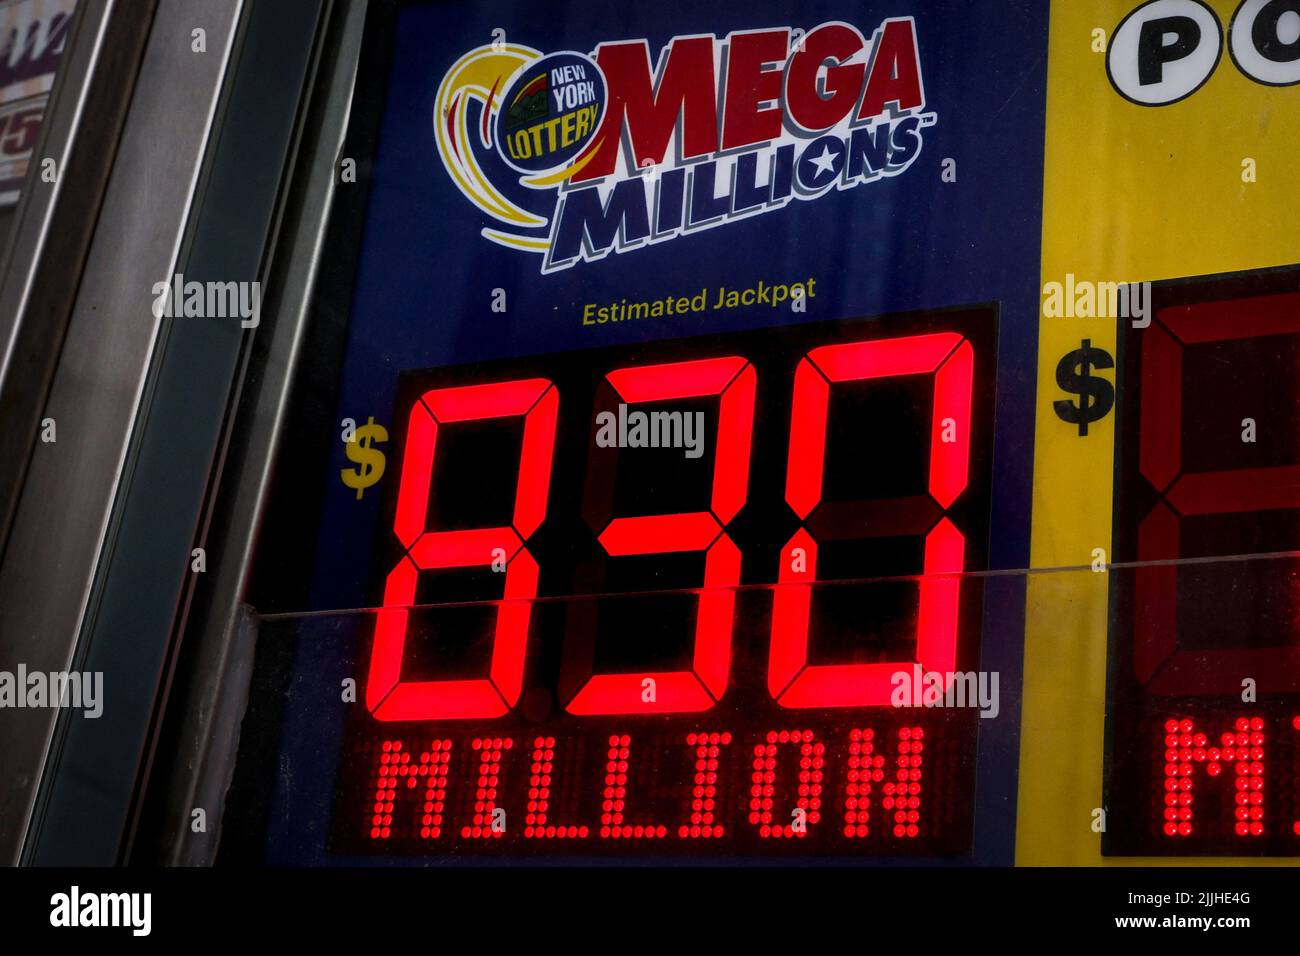 A sign displays the $830 million jackpot total for the Mega Millions lottery drawing at a news stand in New York City, U.S., July 26, 2022.  REUTERS/Brendan McDermid Stock Photo